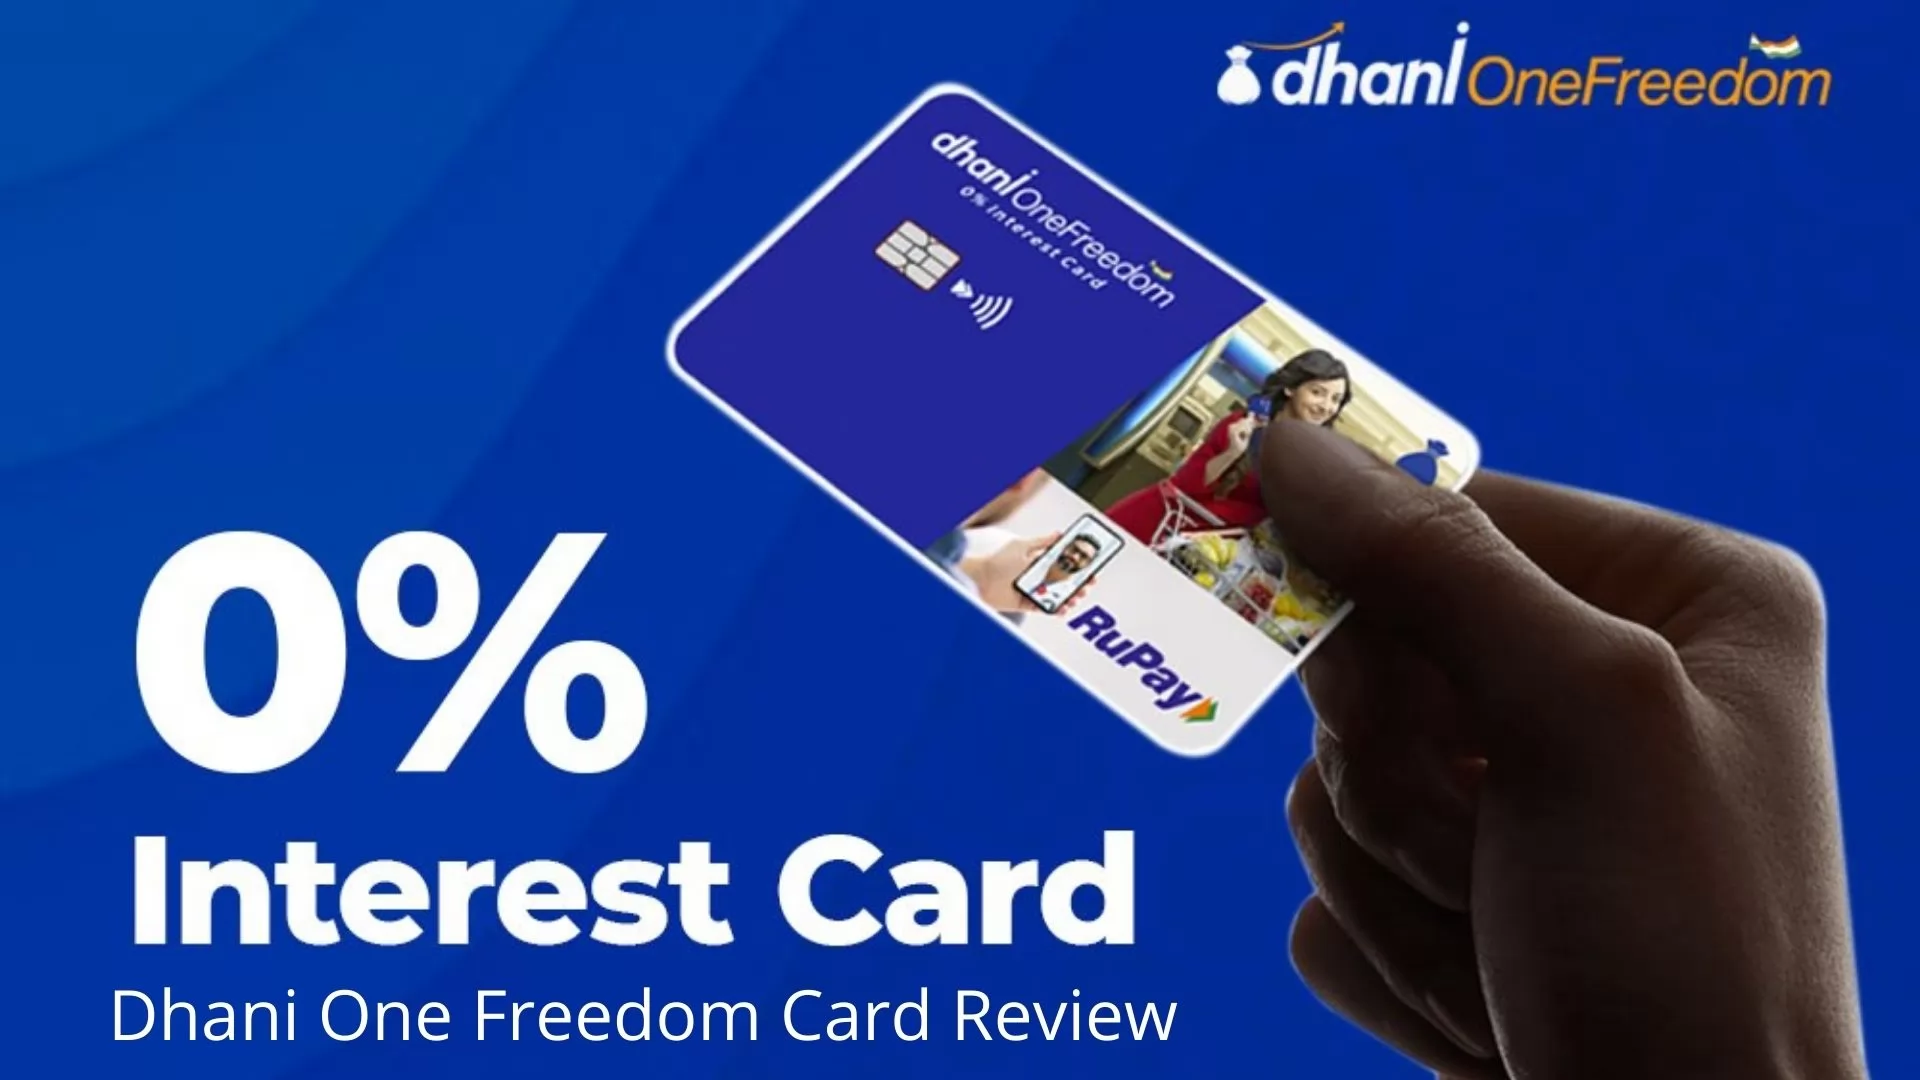 How to Activate Dhani One Freedom Card